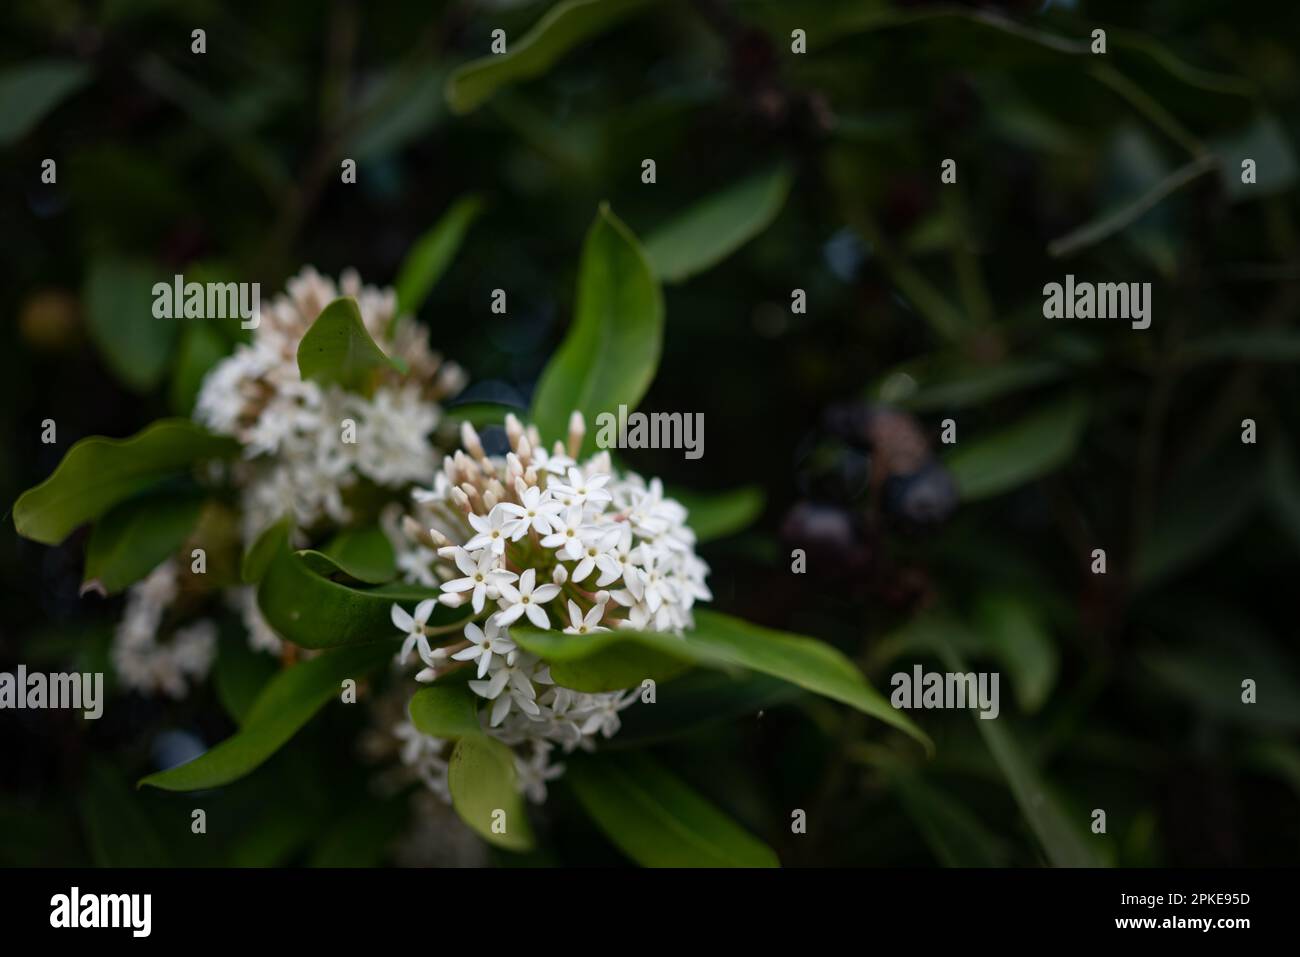 White flowers on green leaves background with black berries. African wintersweet Stock Photo